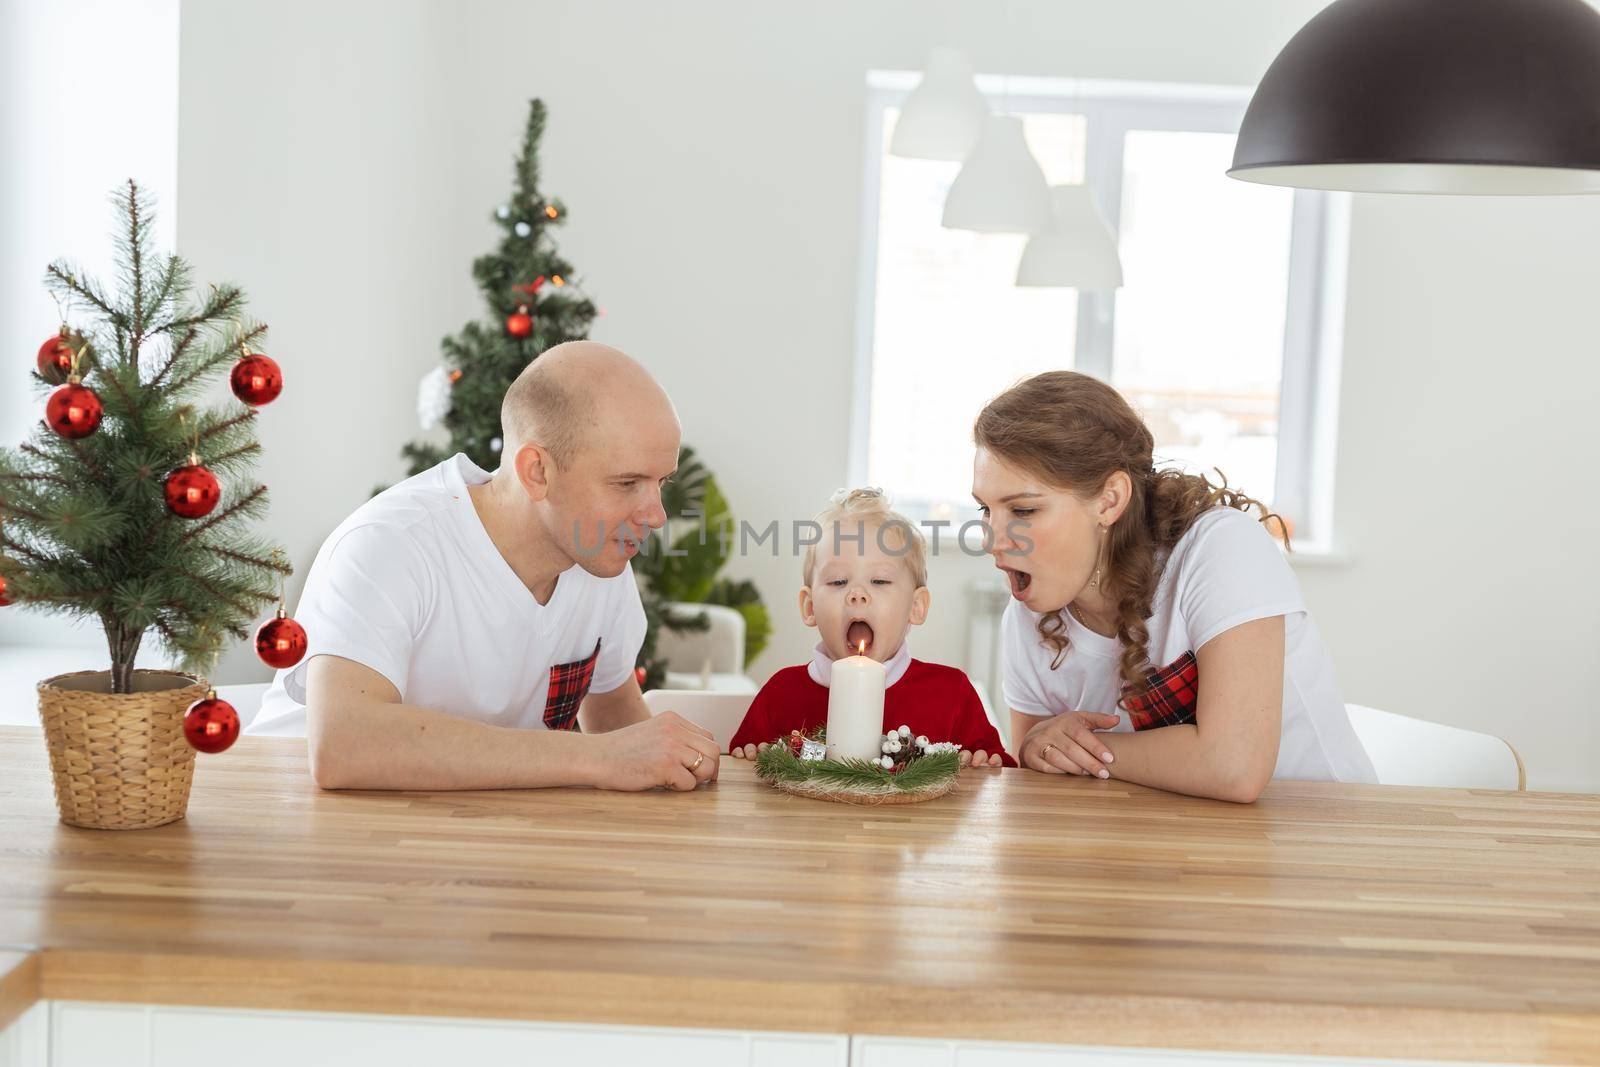 Baby child with hearing aid and cochlear implant having fun with parents in christmas room. Deaf , diversity and health concept by Satura86